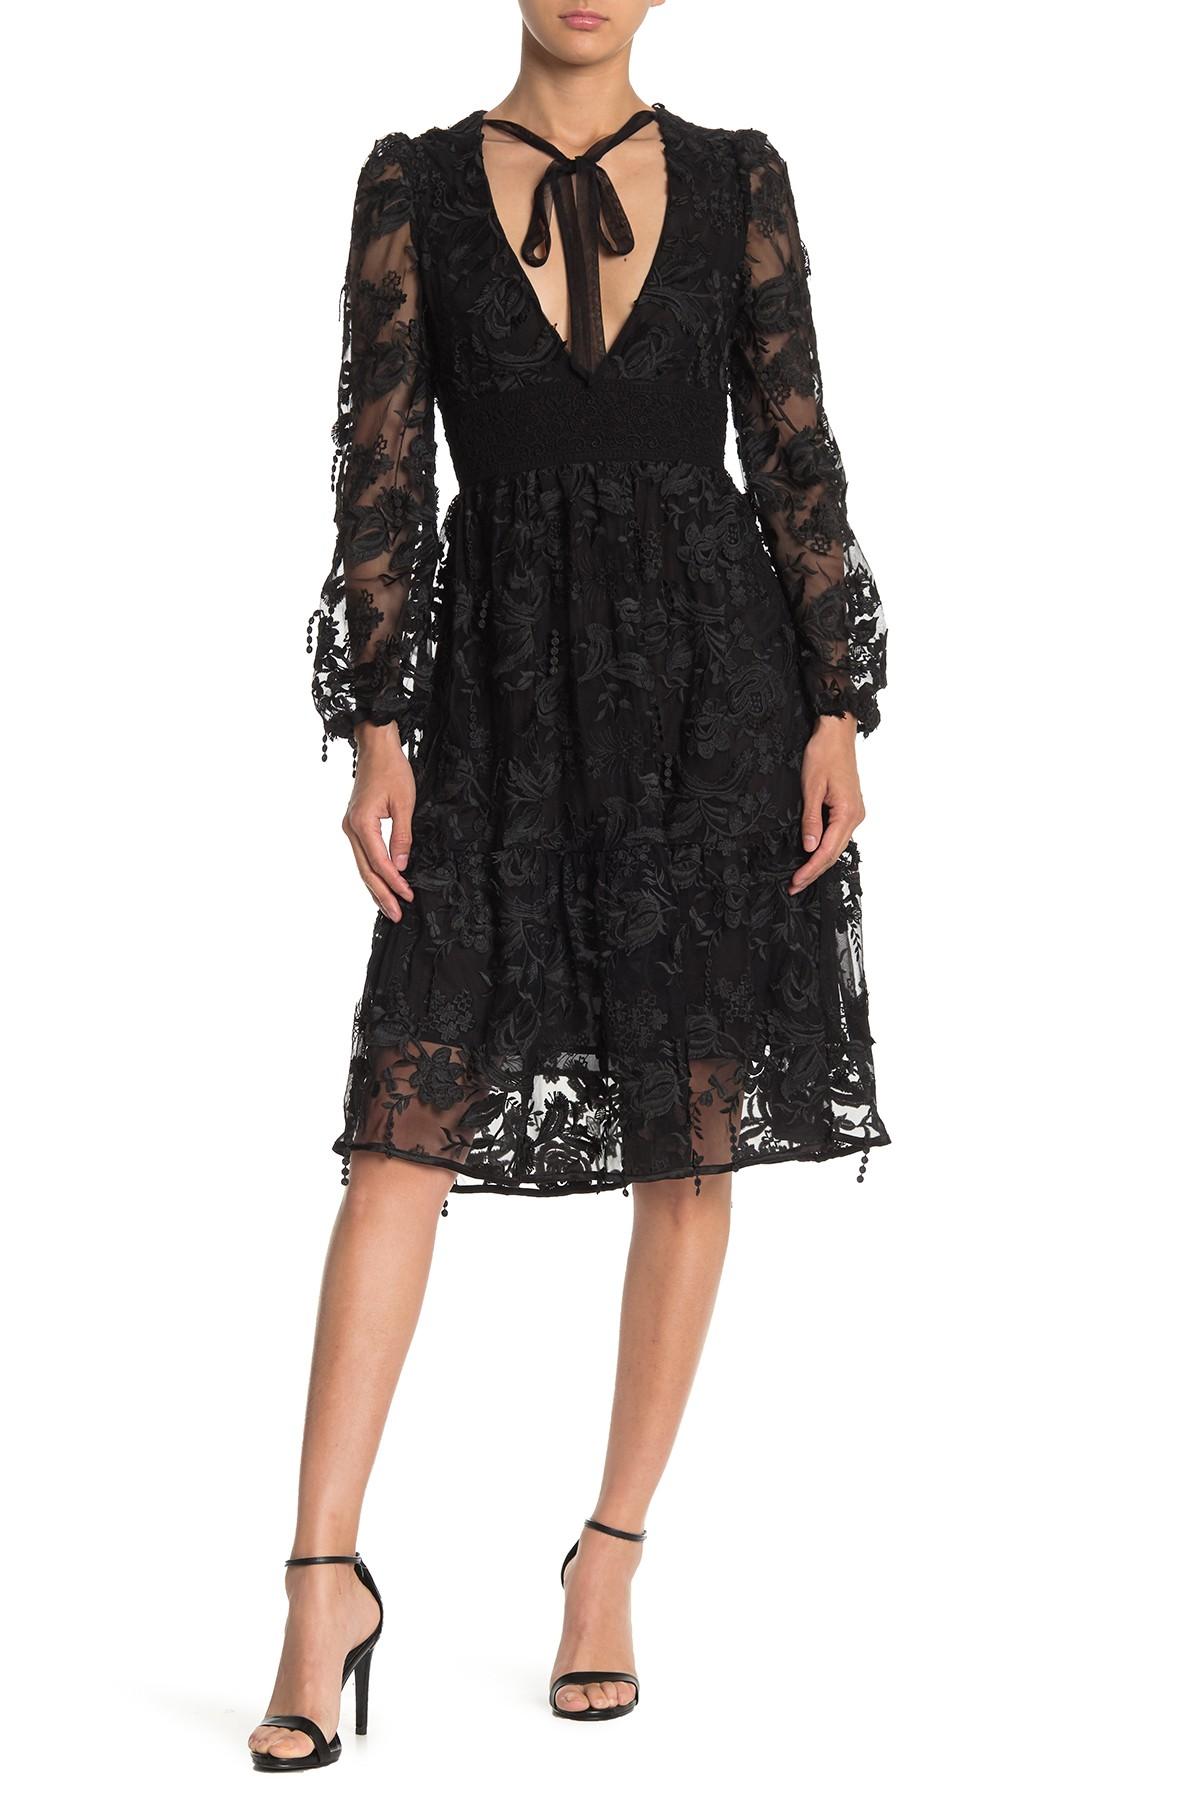 Cynthia Rowley Harlow Tie Front Lace Long Sleeve Midi Dress In Black Lyst